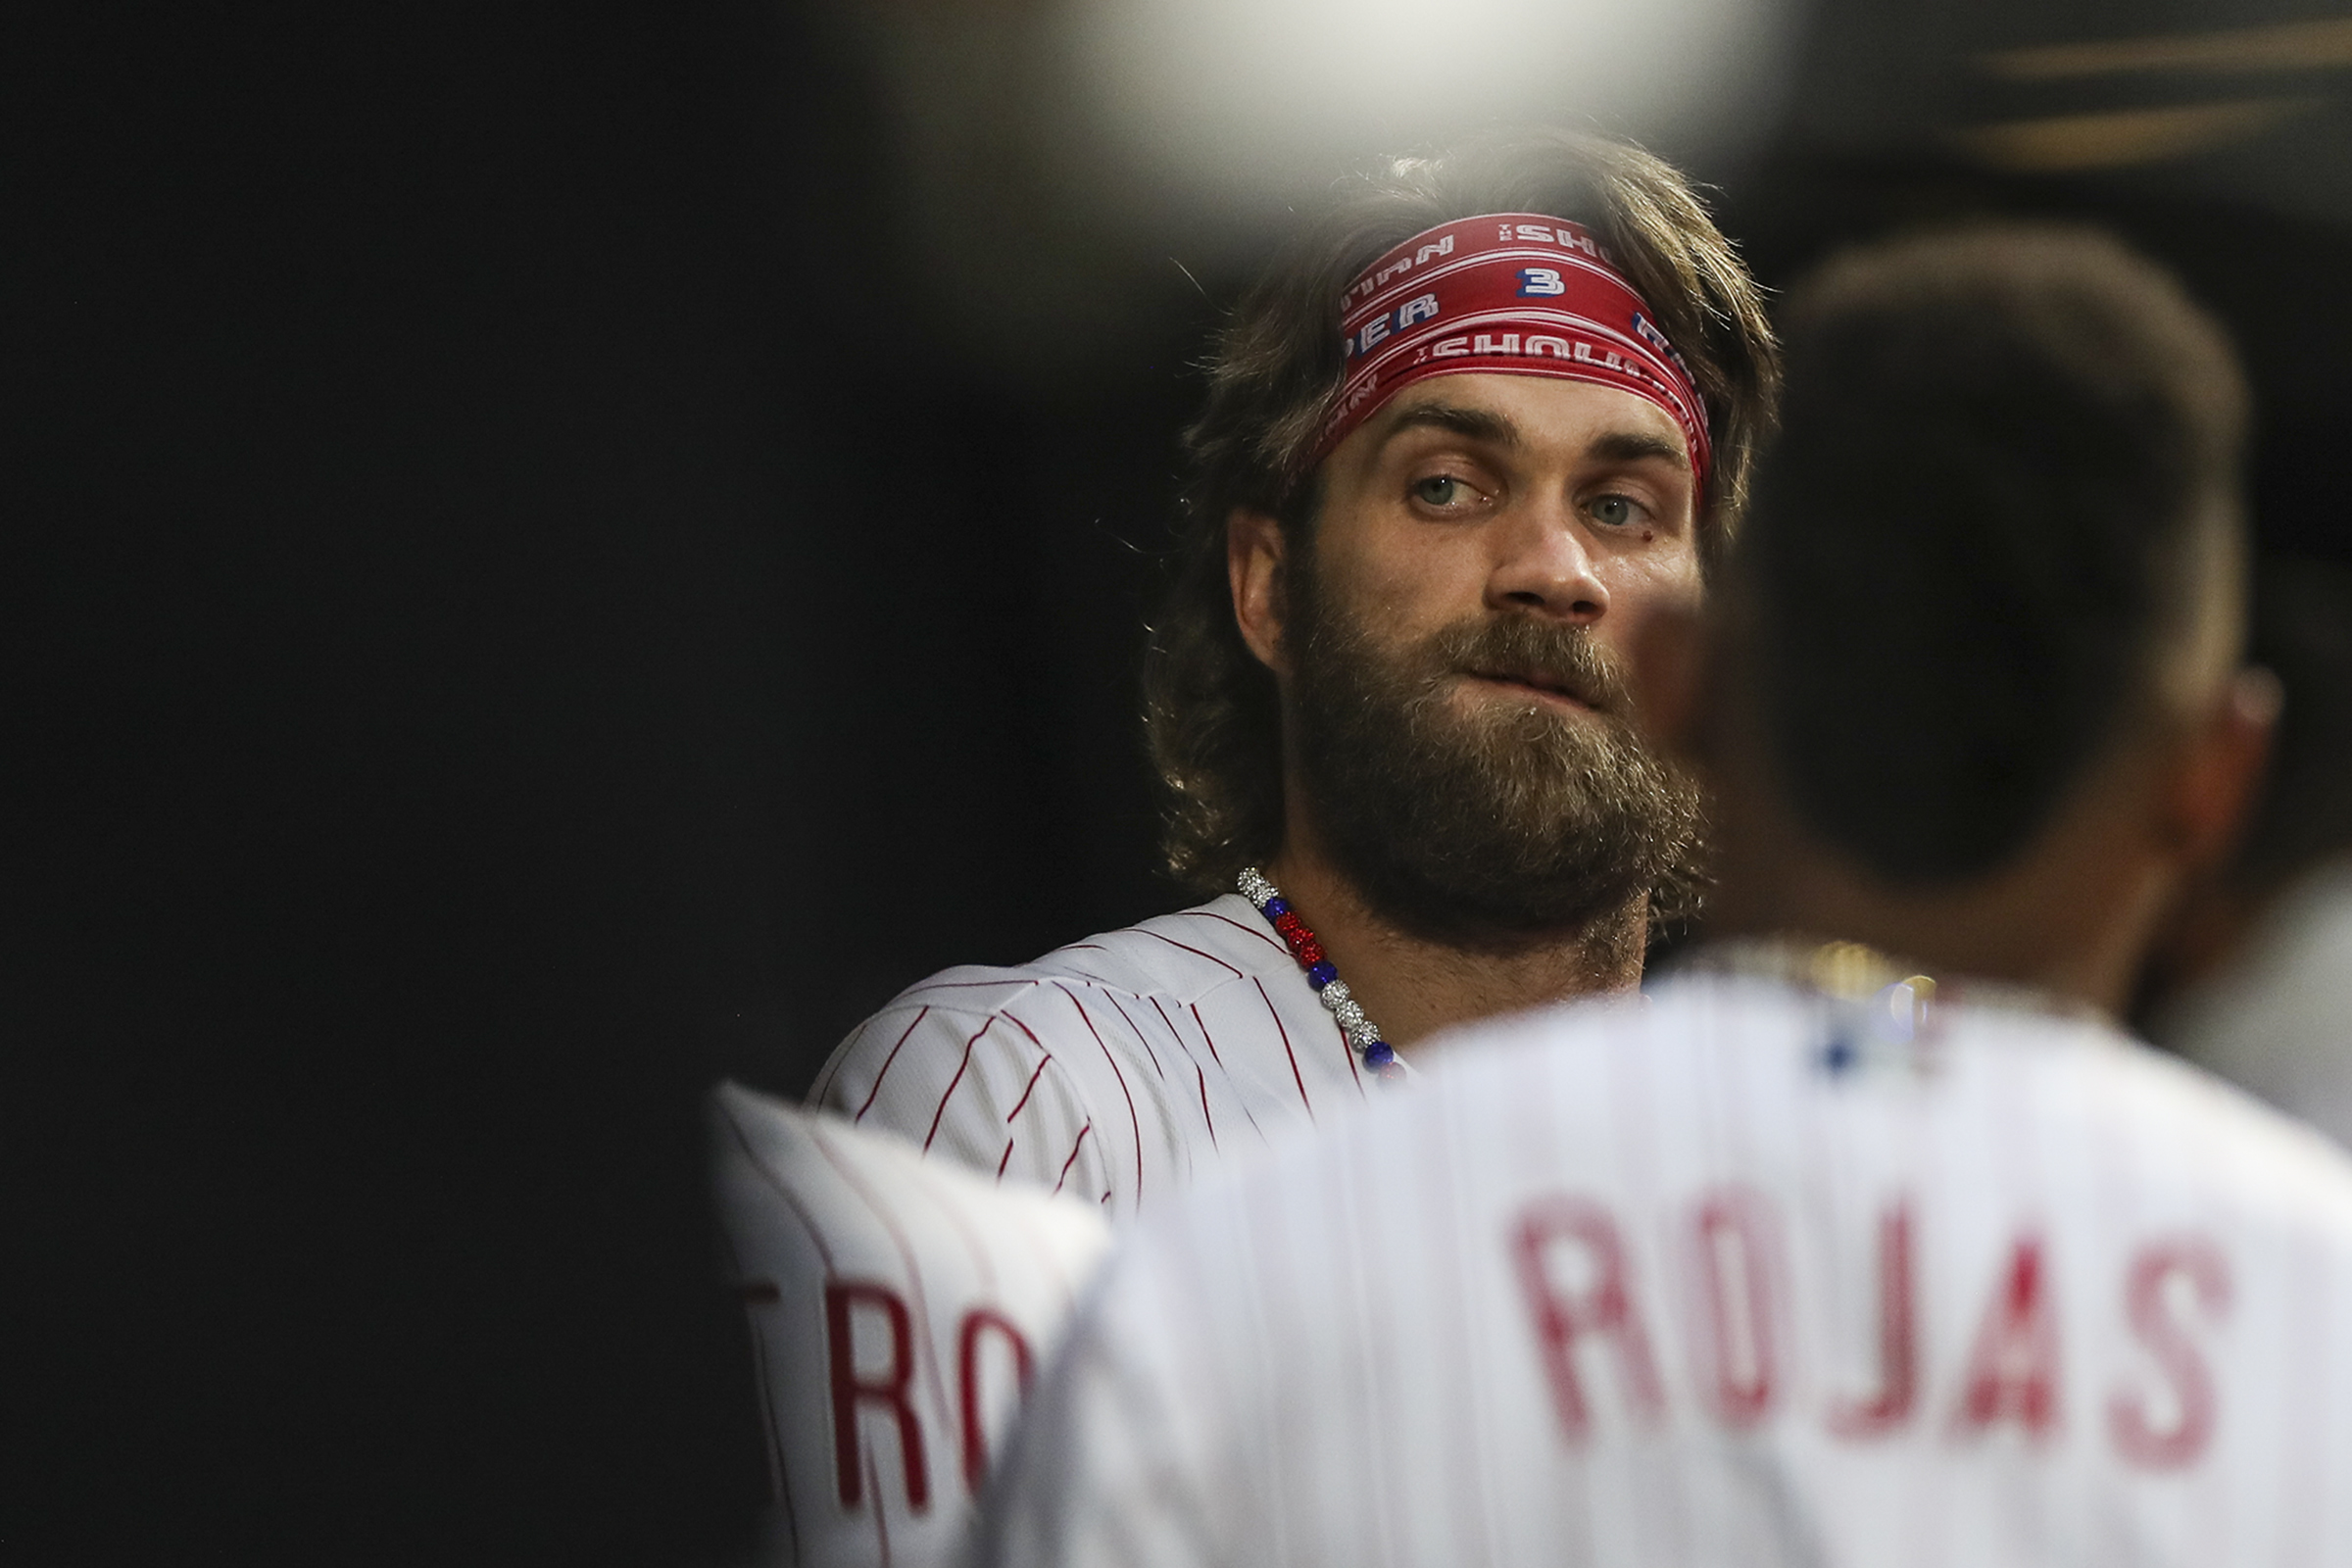 Phillies' slugger still stepping up rehab after elbow surgery